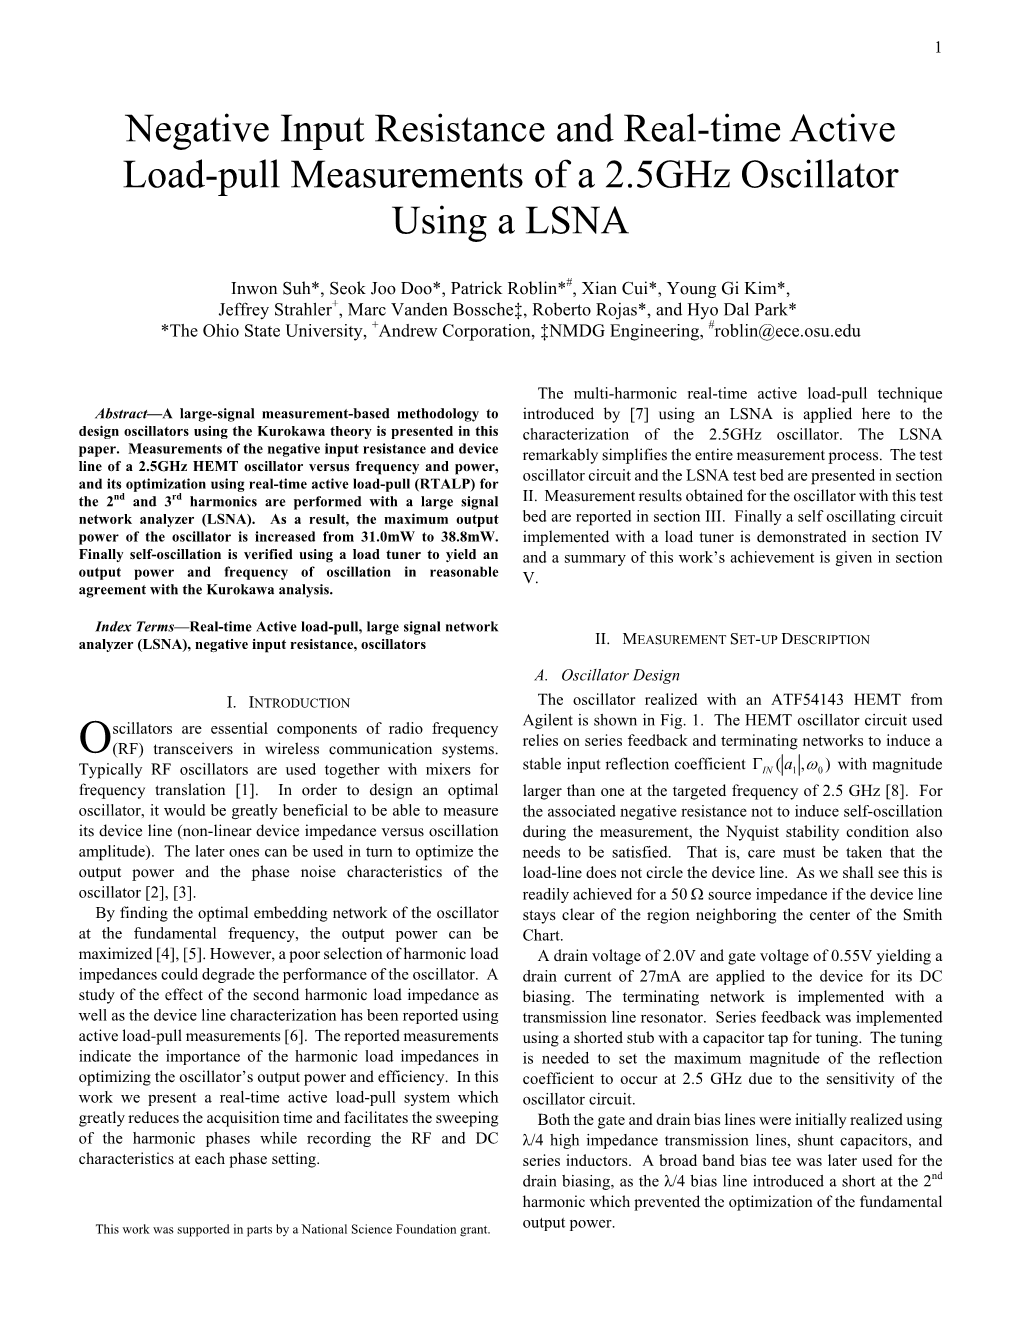 Negative Input Resistance and Real-Time Active Load-Pull Measurements of a 2.5Ghz Oscillator Using a LSNA